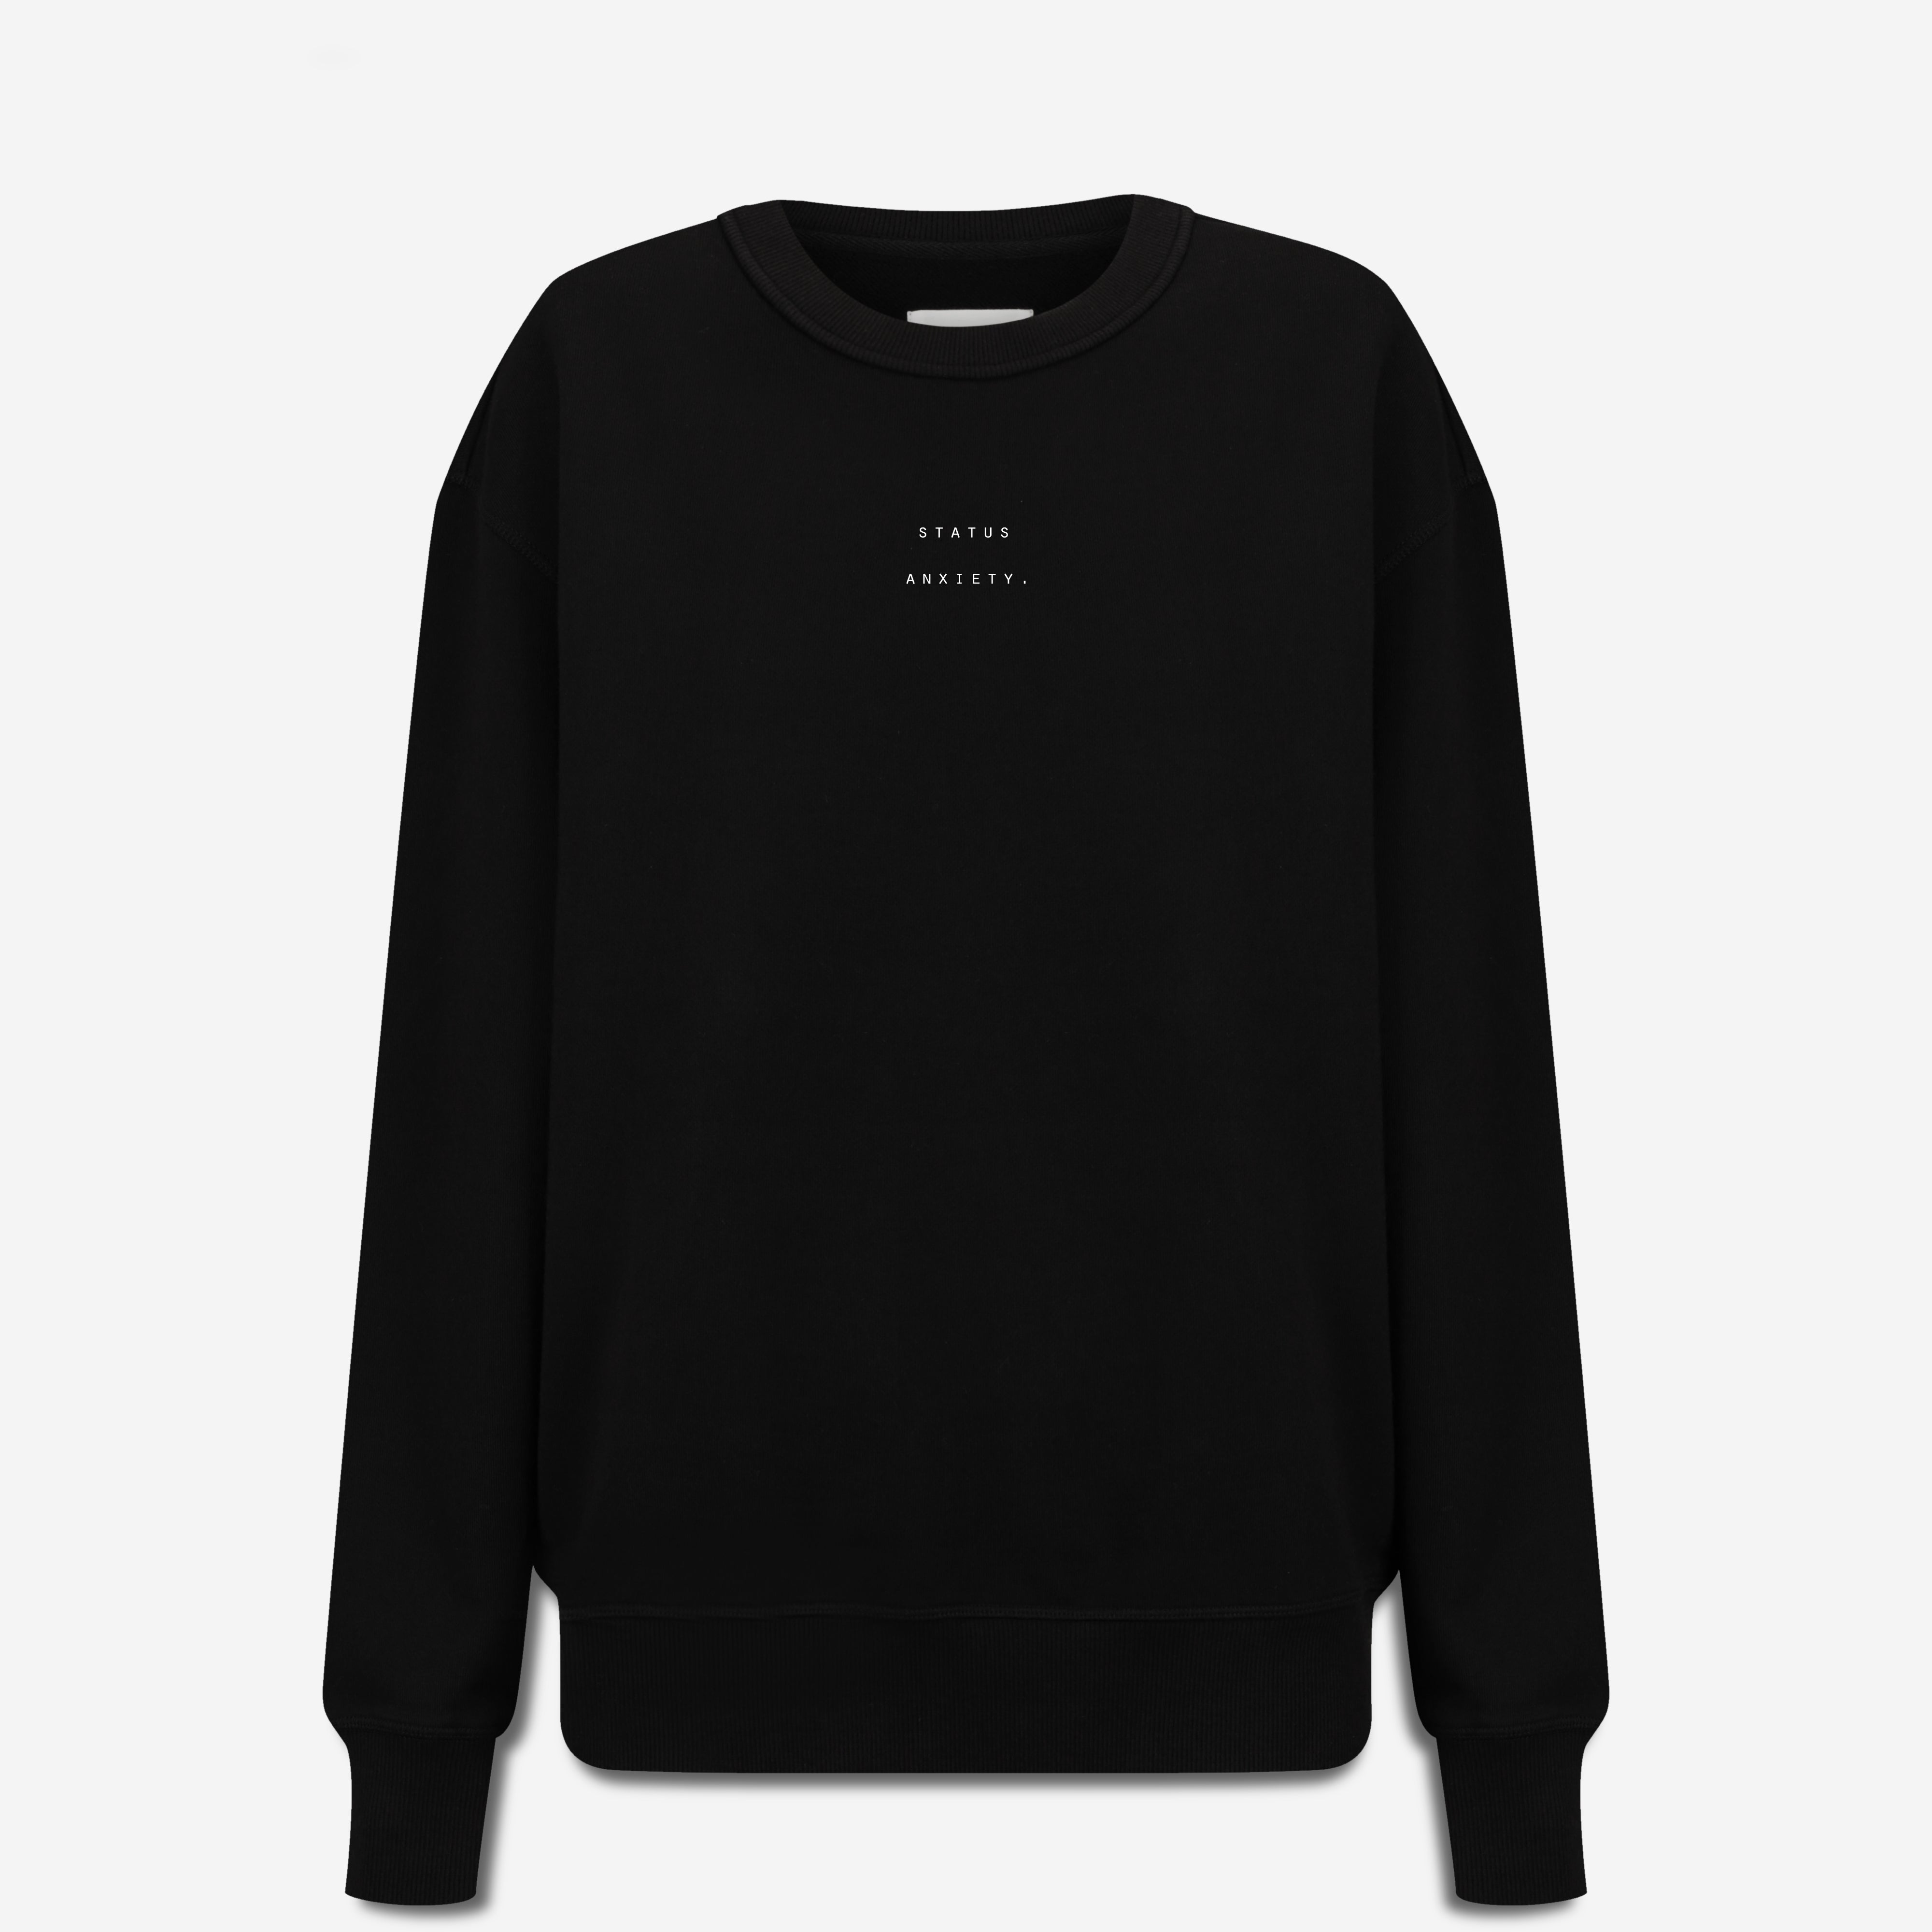 Could Be Nice - Logo - Women's Classic Crew / Soft Black